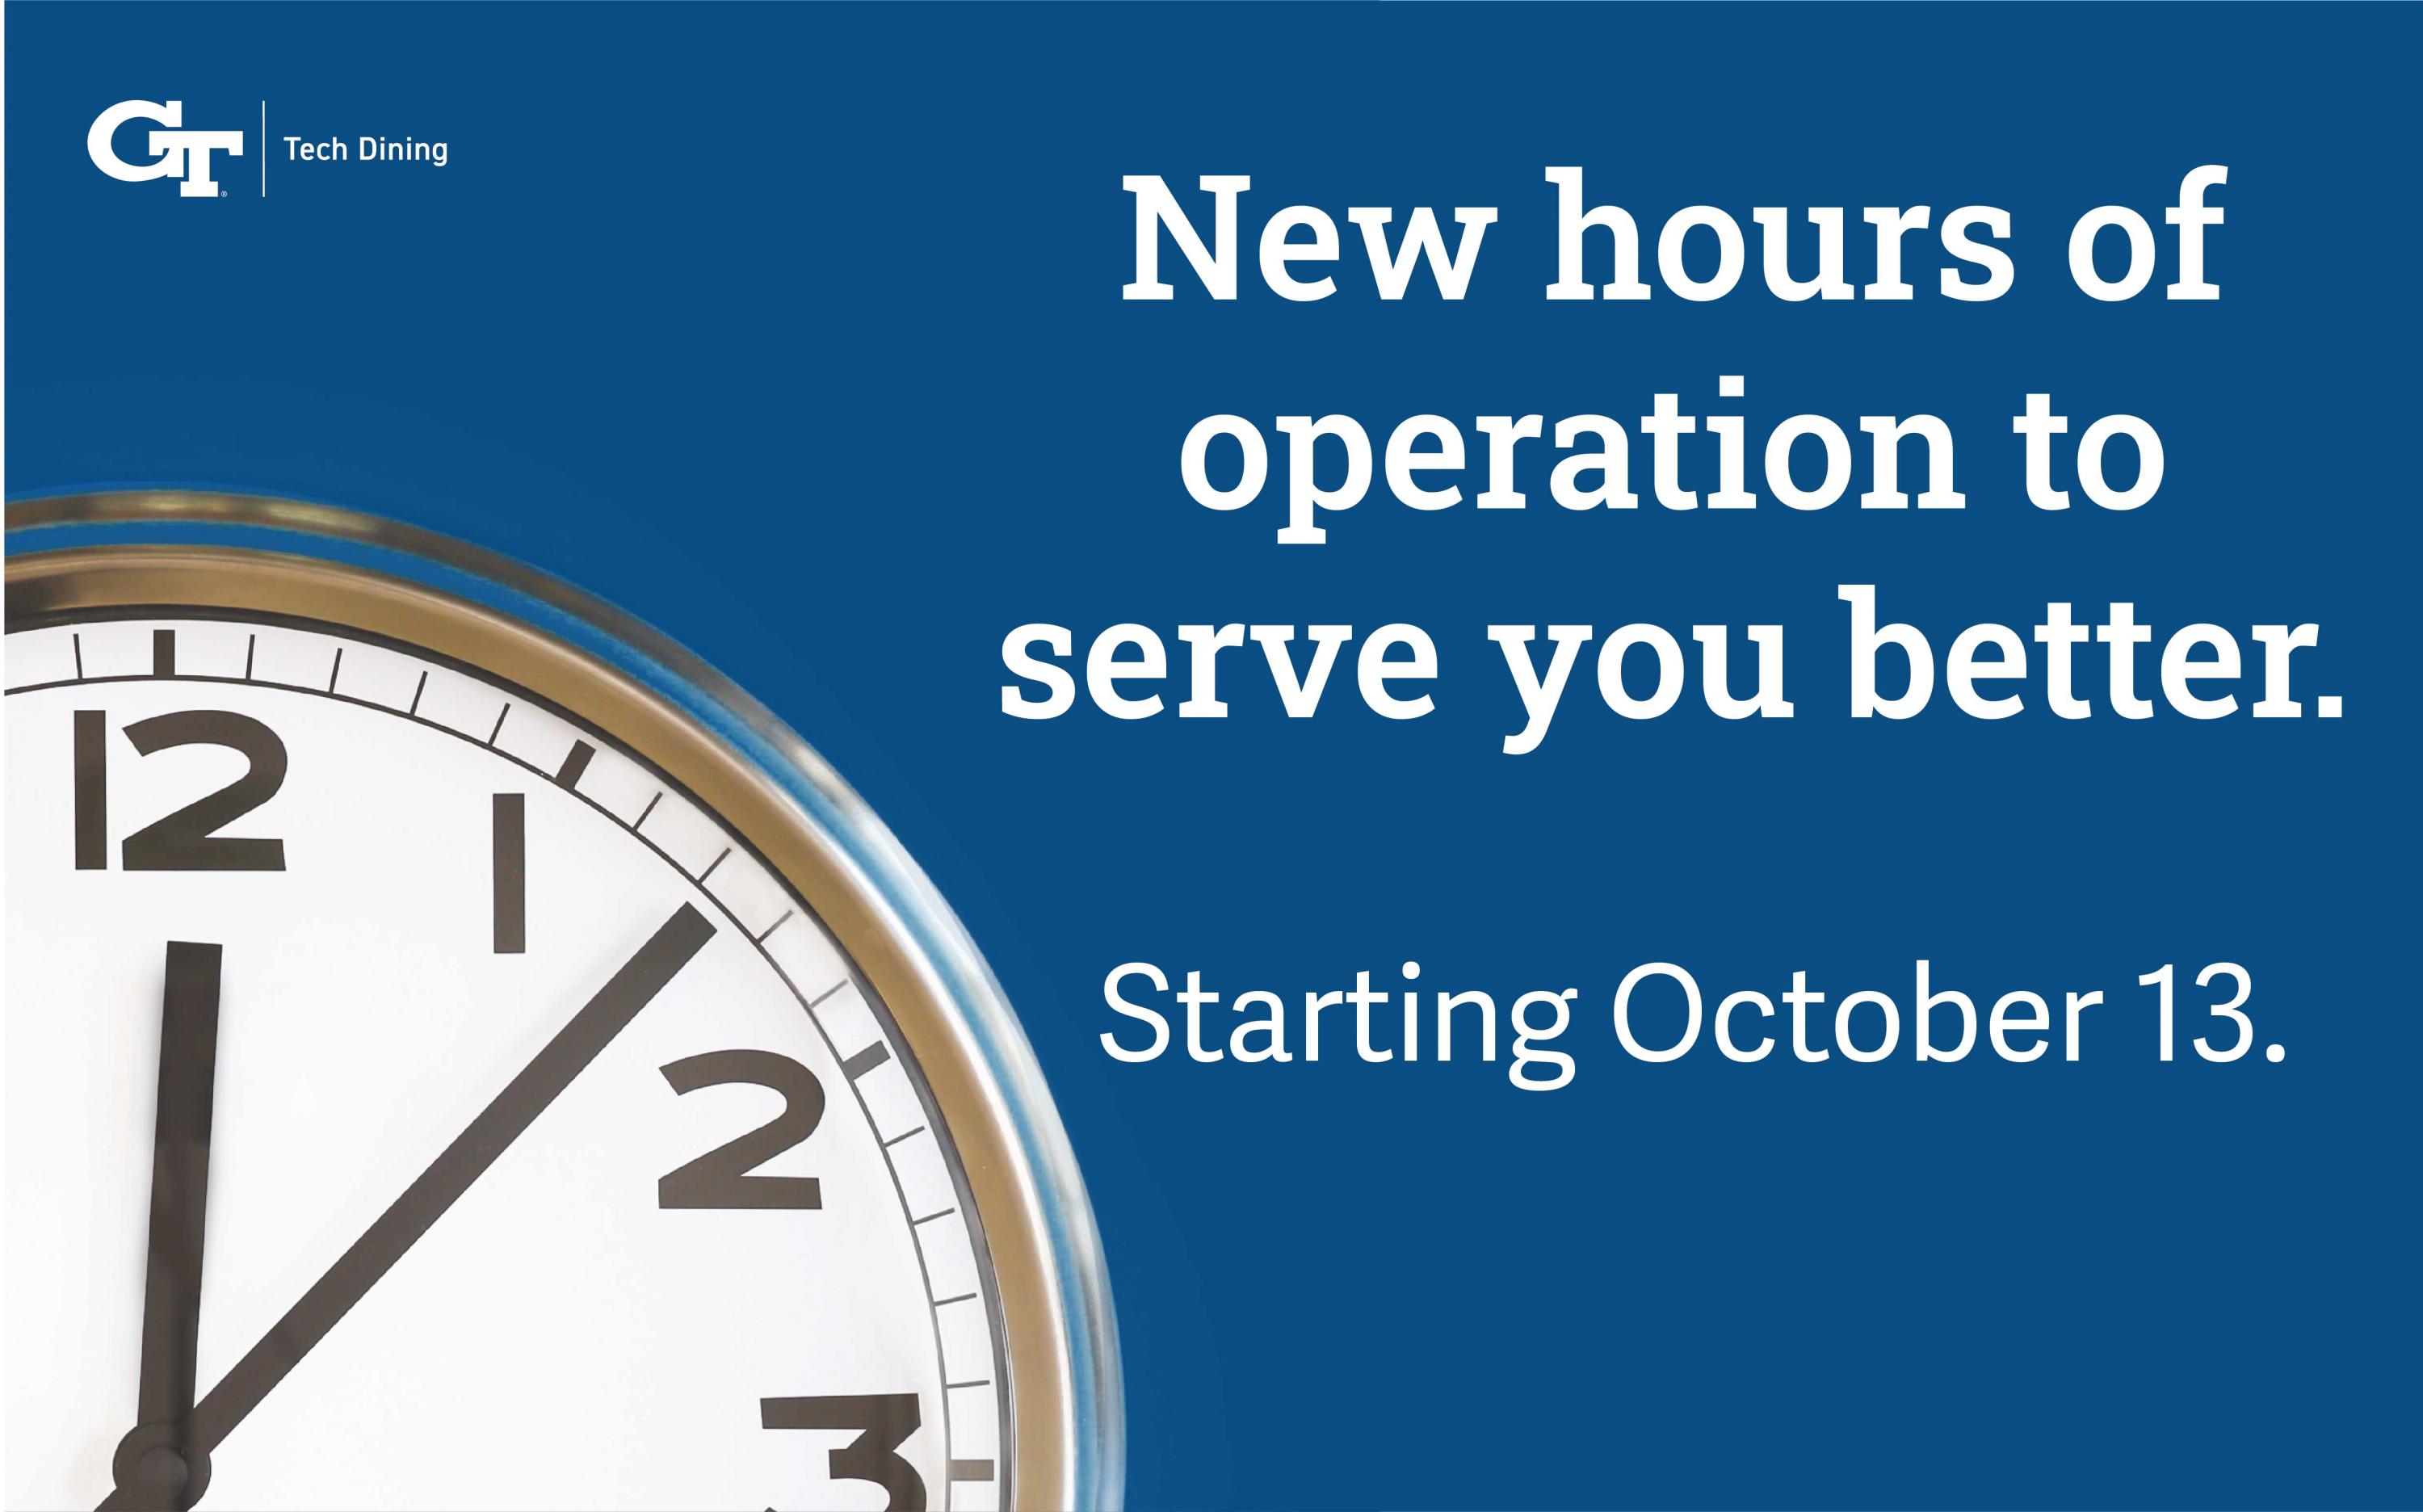 Tech Dining is altering the hours of operation for residential and retail dining locations across campus starting October 13. 